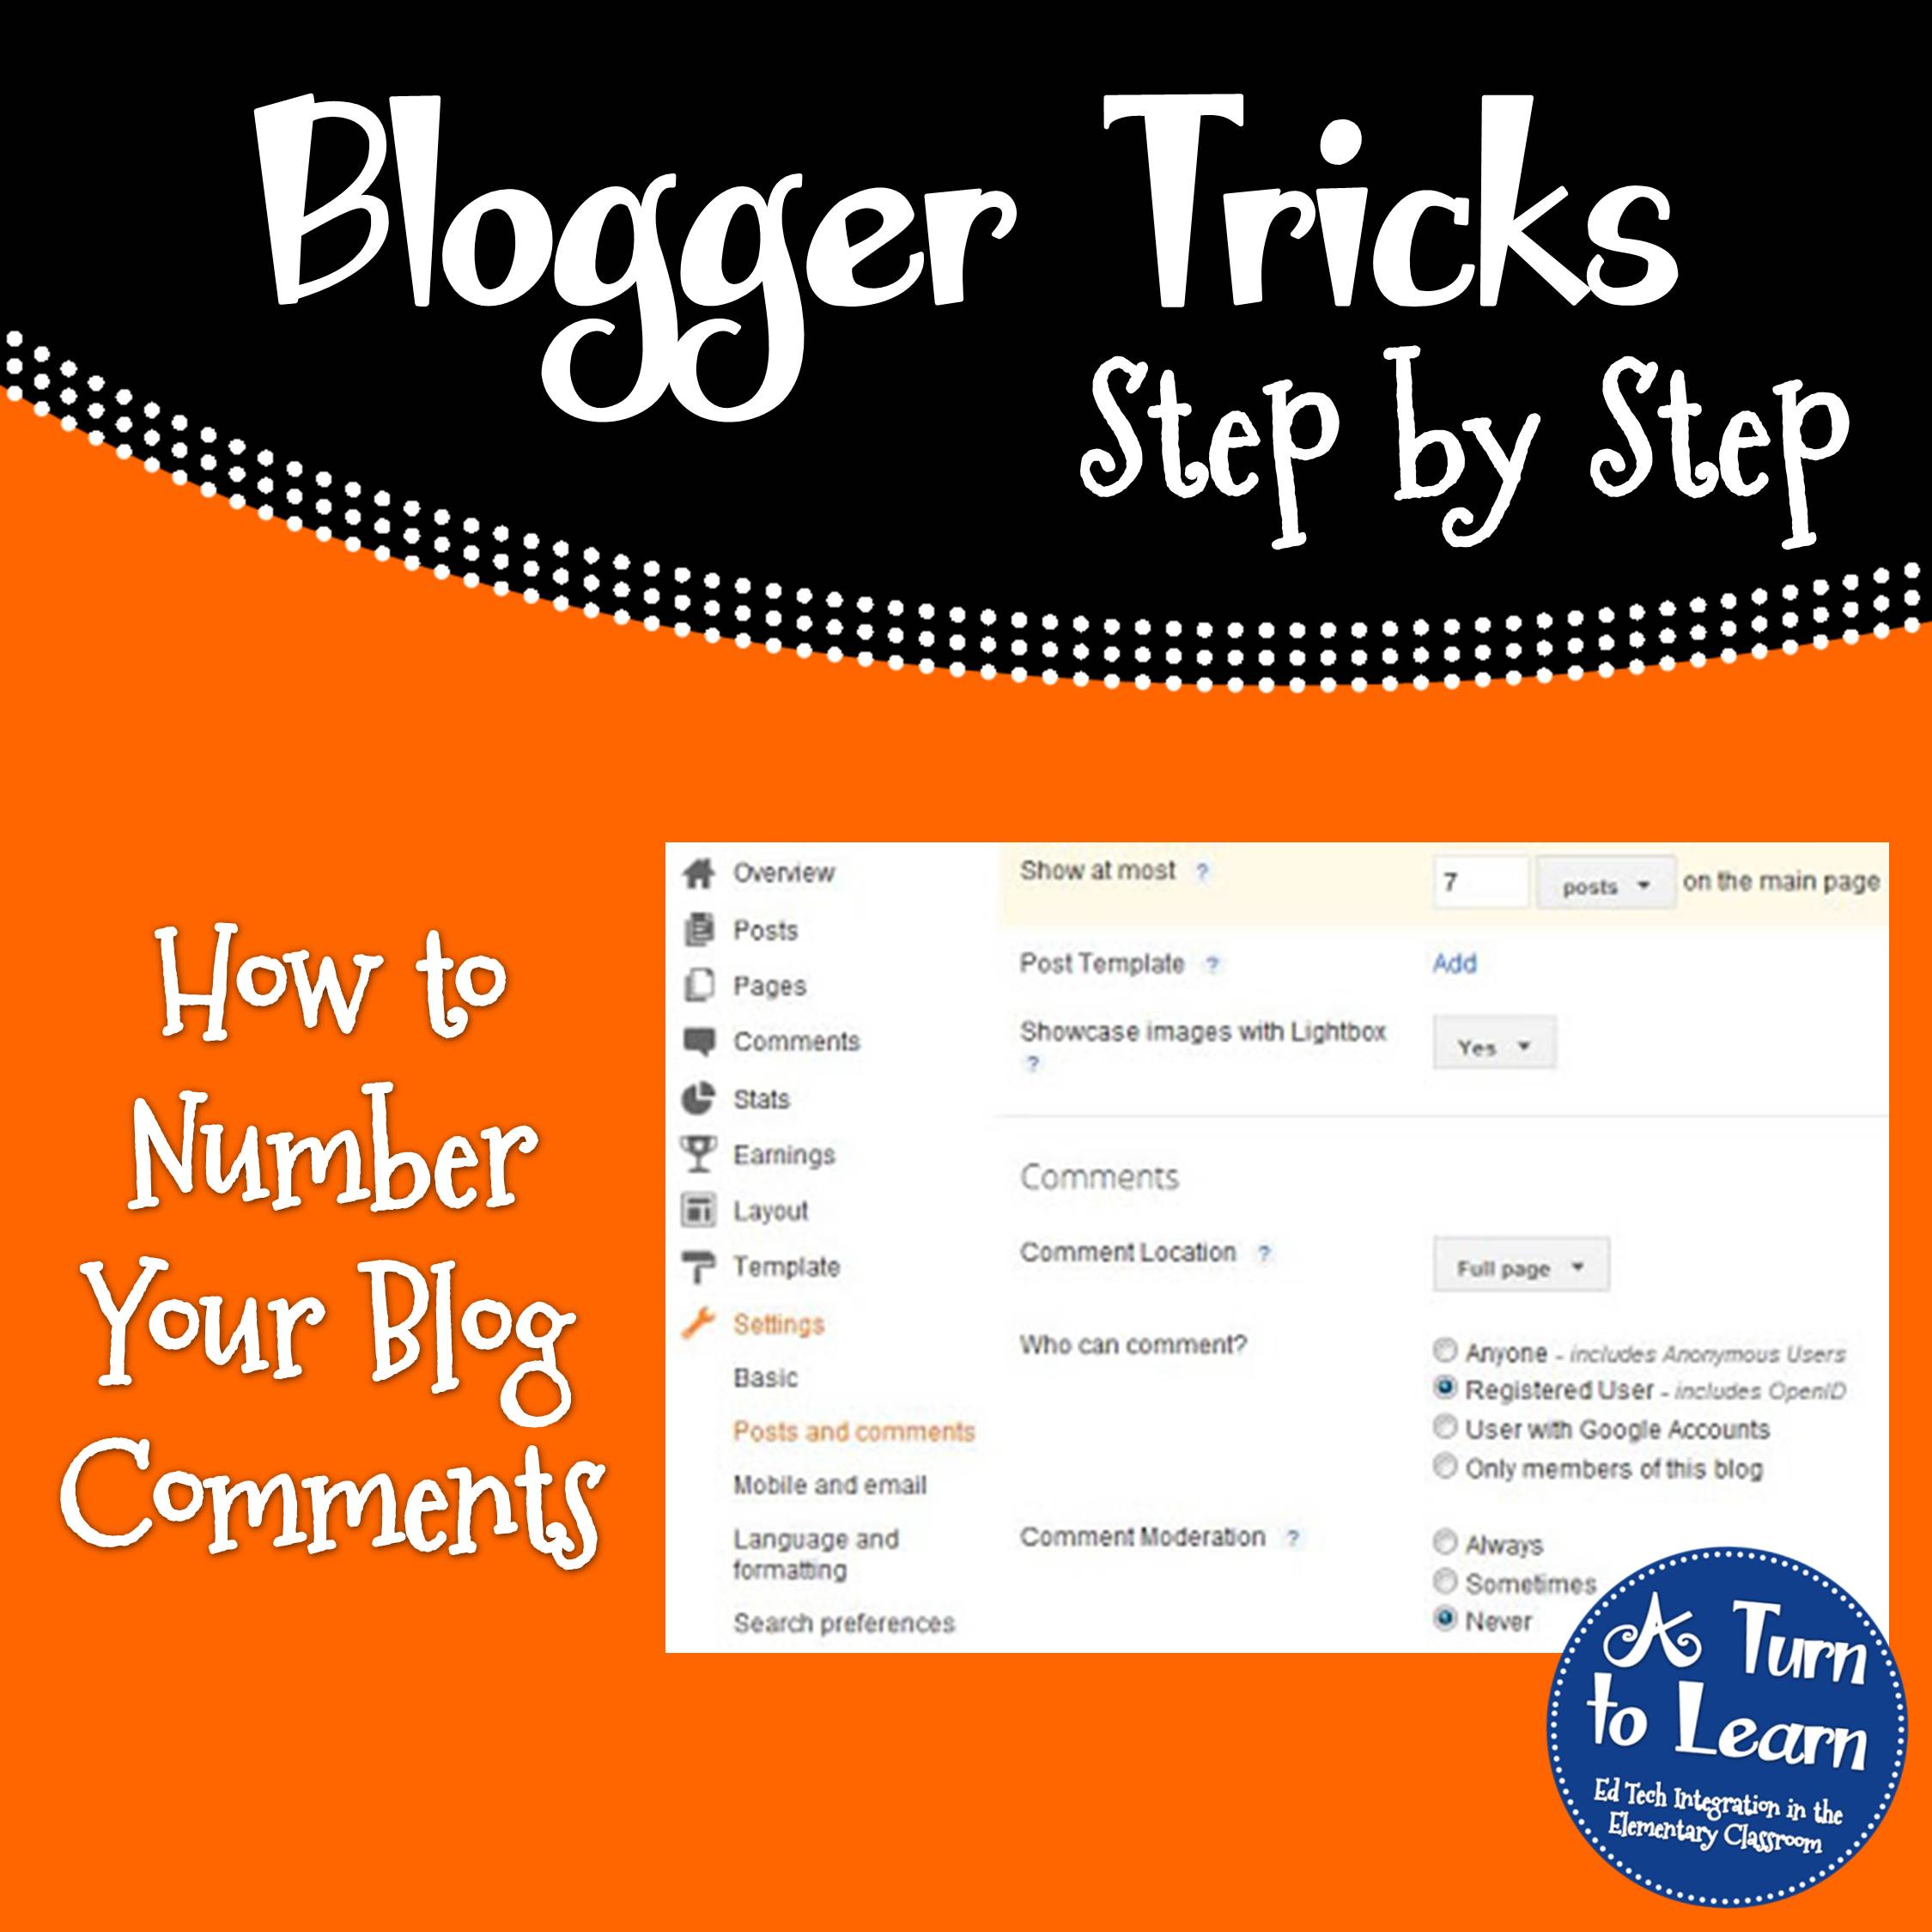 How to Number Your Blog Comments